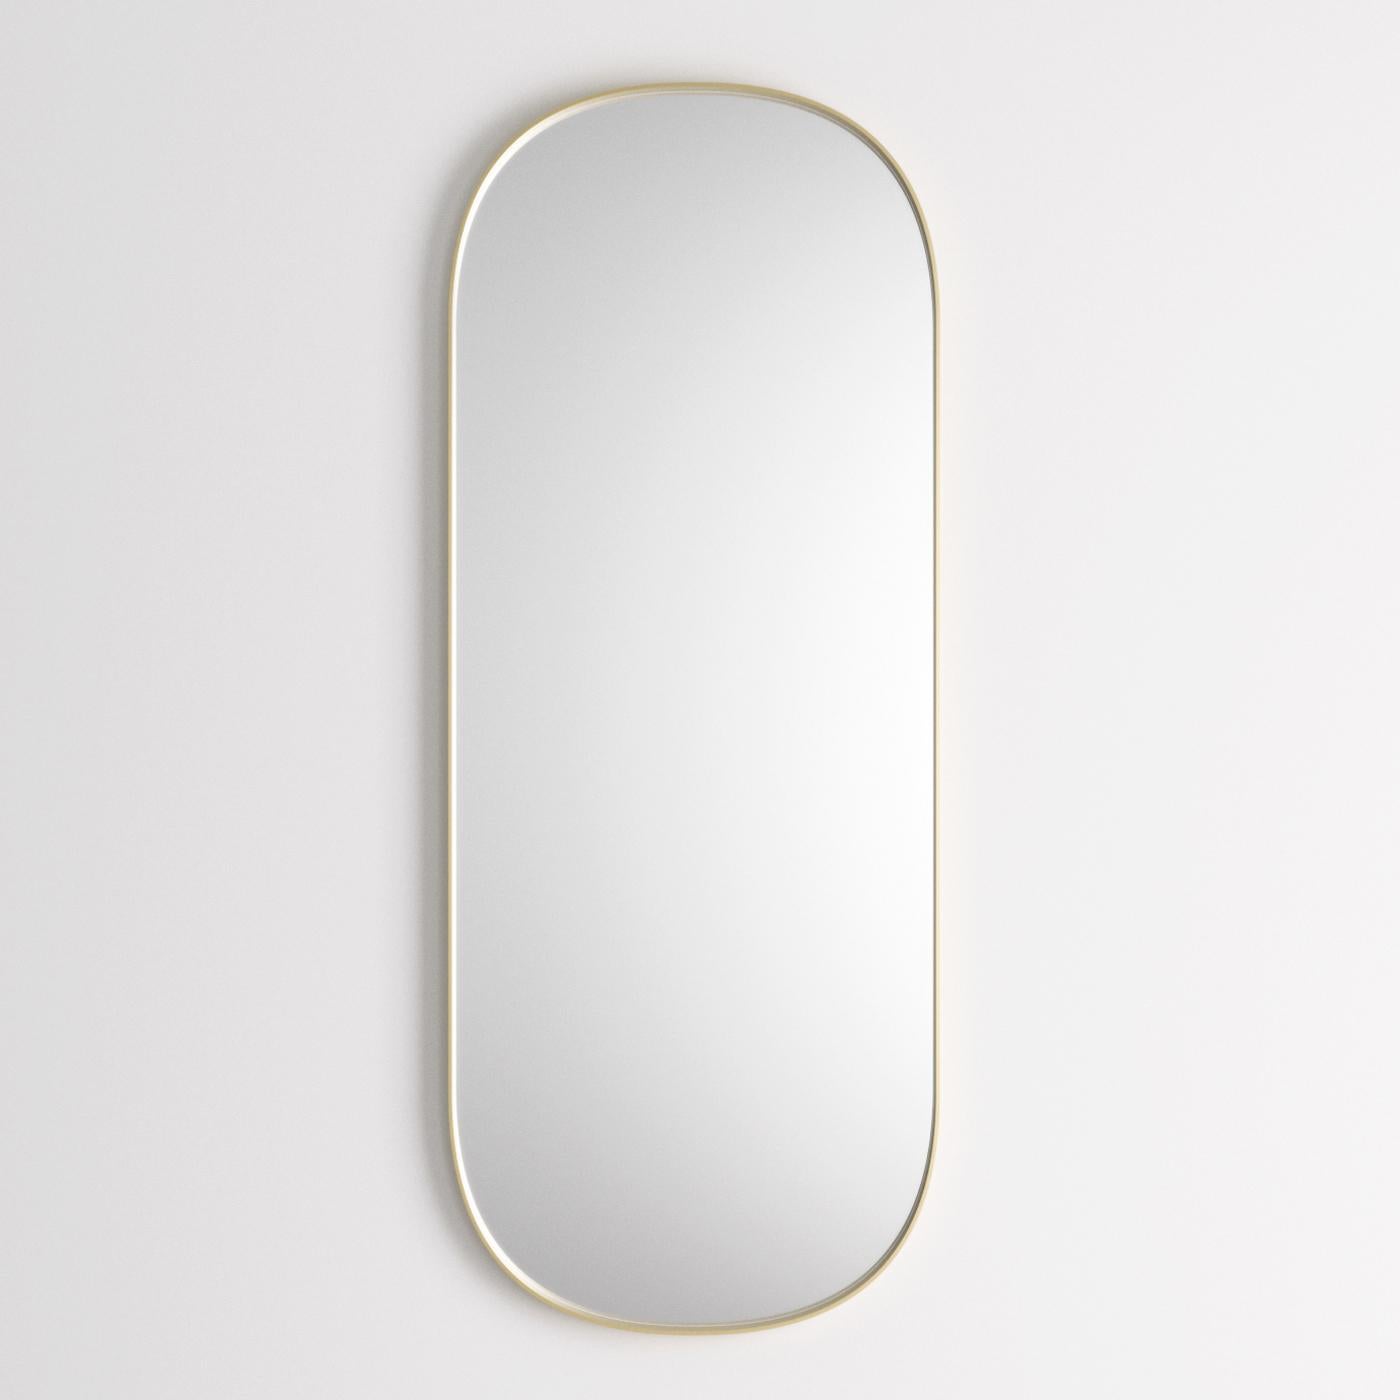 This rectangular mirror (4mm-thick) will perfectly suit a home interior, as well as a working area or studio, thanks to its elegant, natural finishes. Boasting rounded edges, the frame is made of brass-varnished steel, and is 50mm-thick, adding a